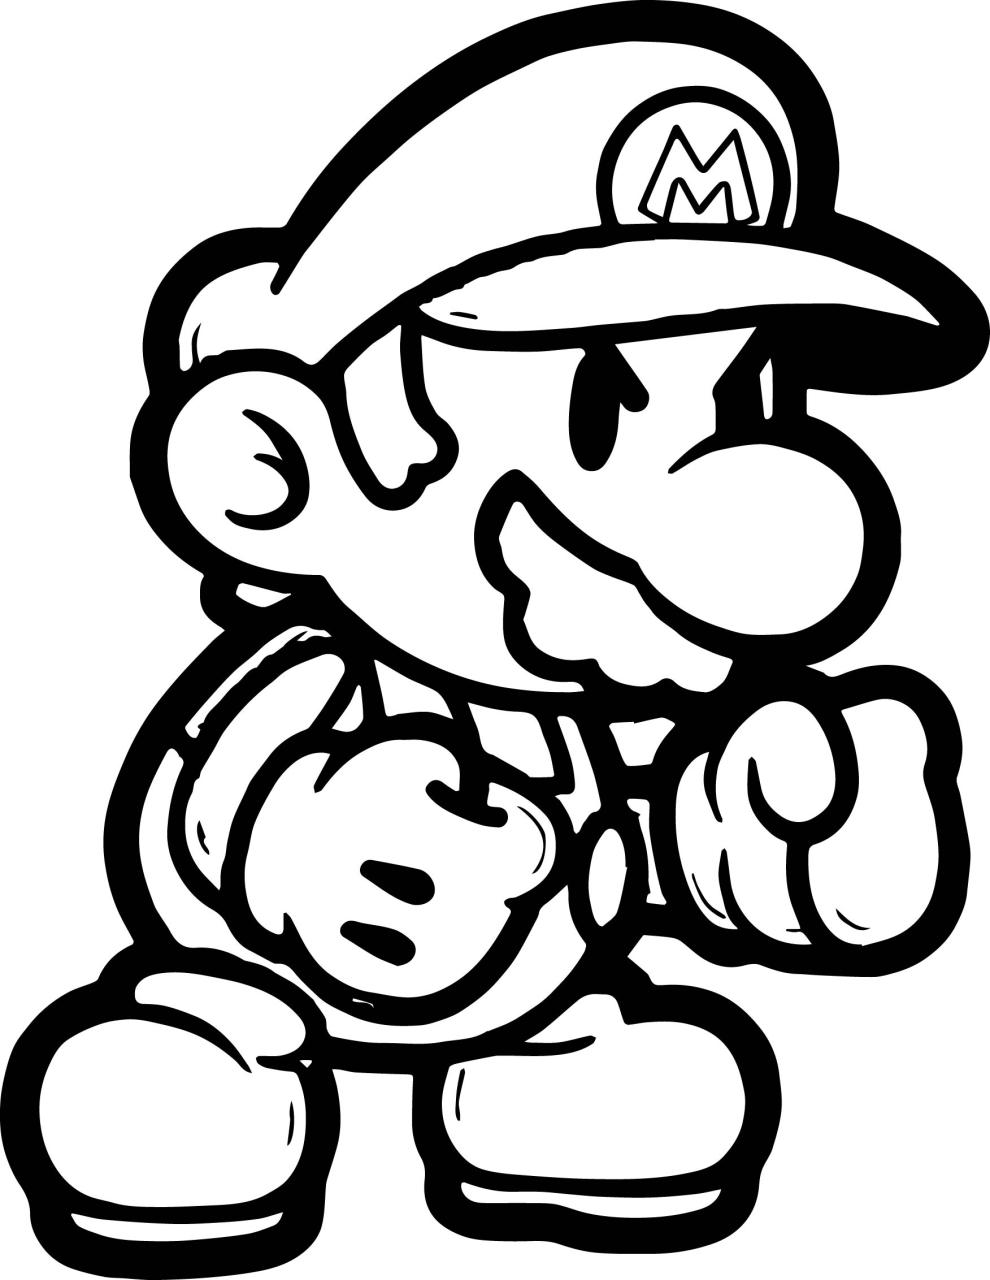 Paper Mario Printable Coloring Pages